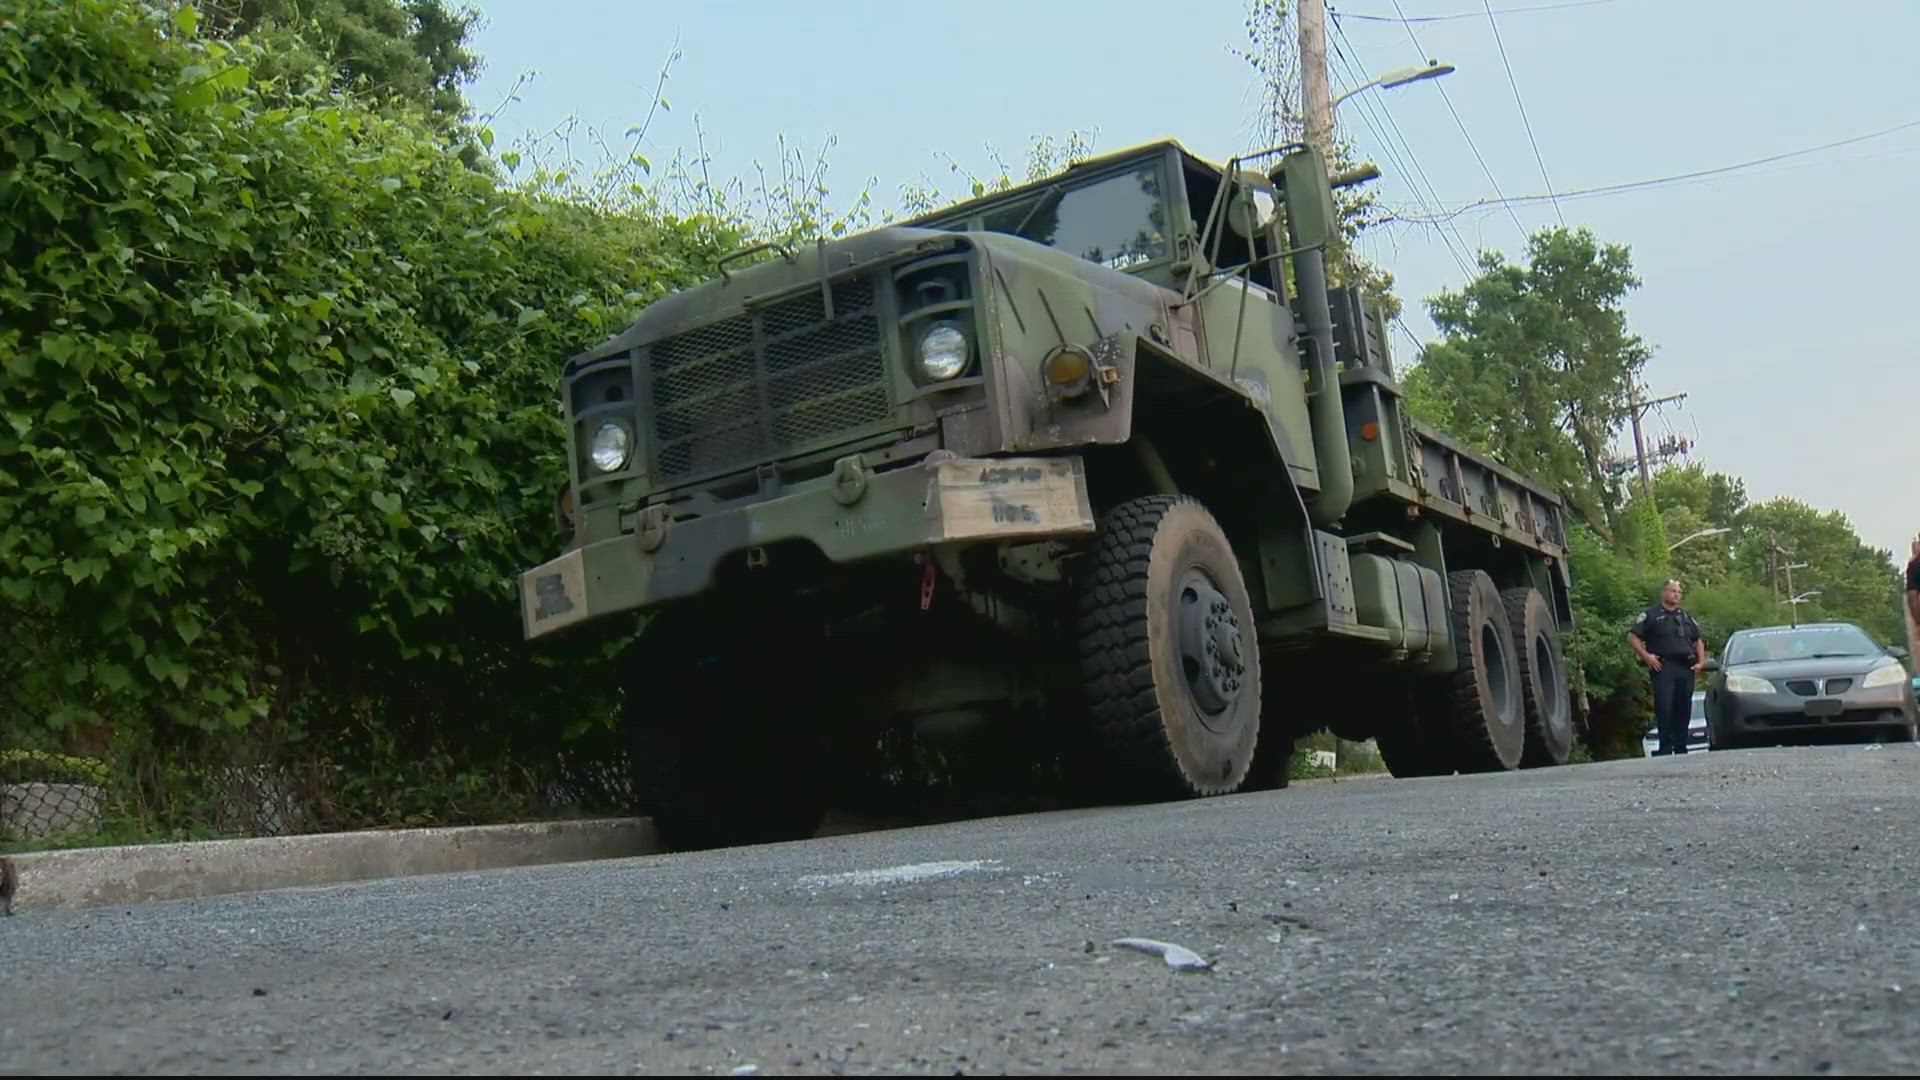 Police say 38-year-old Michael Stevens stole a 5-ton military vehicle.